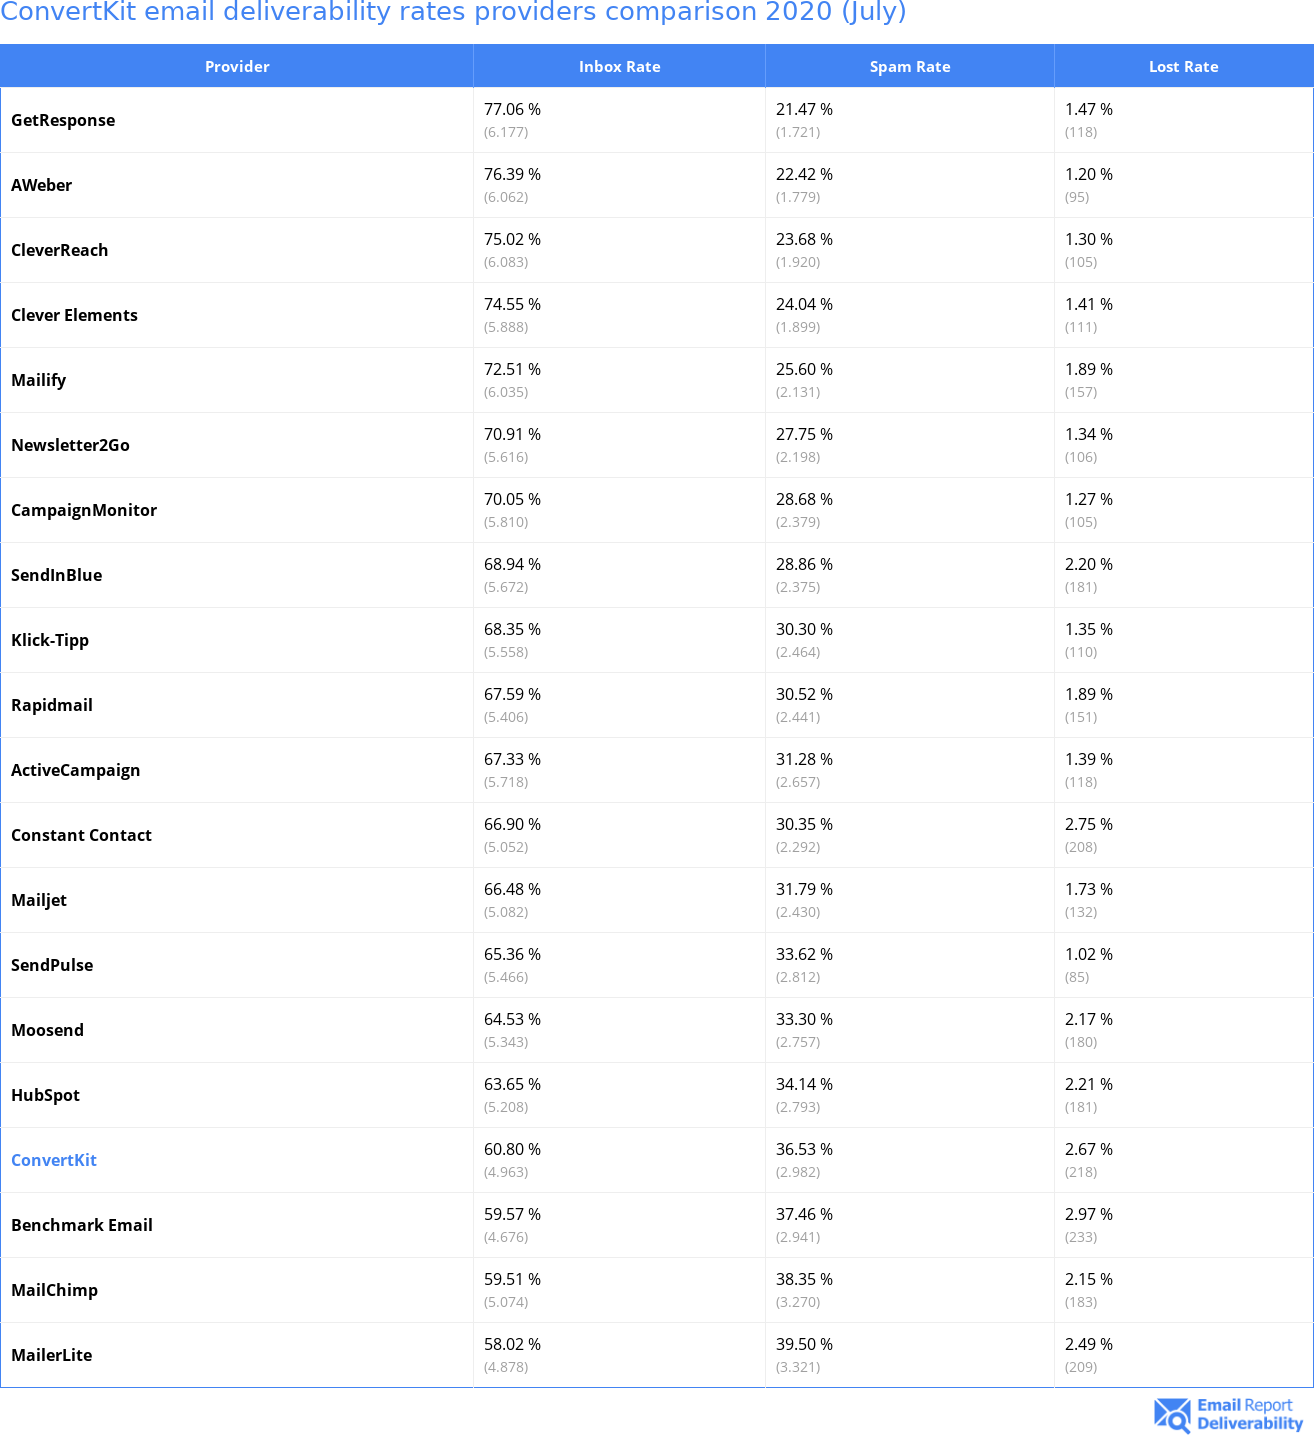 ConvertKit email deliverability rates providers comparison 2020 (July)